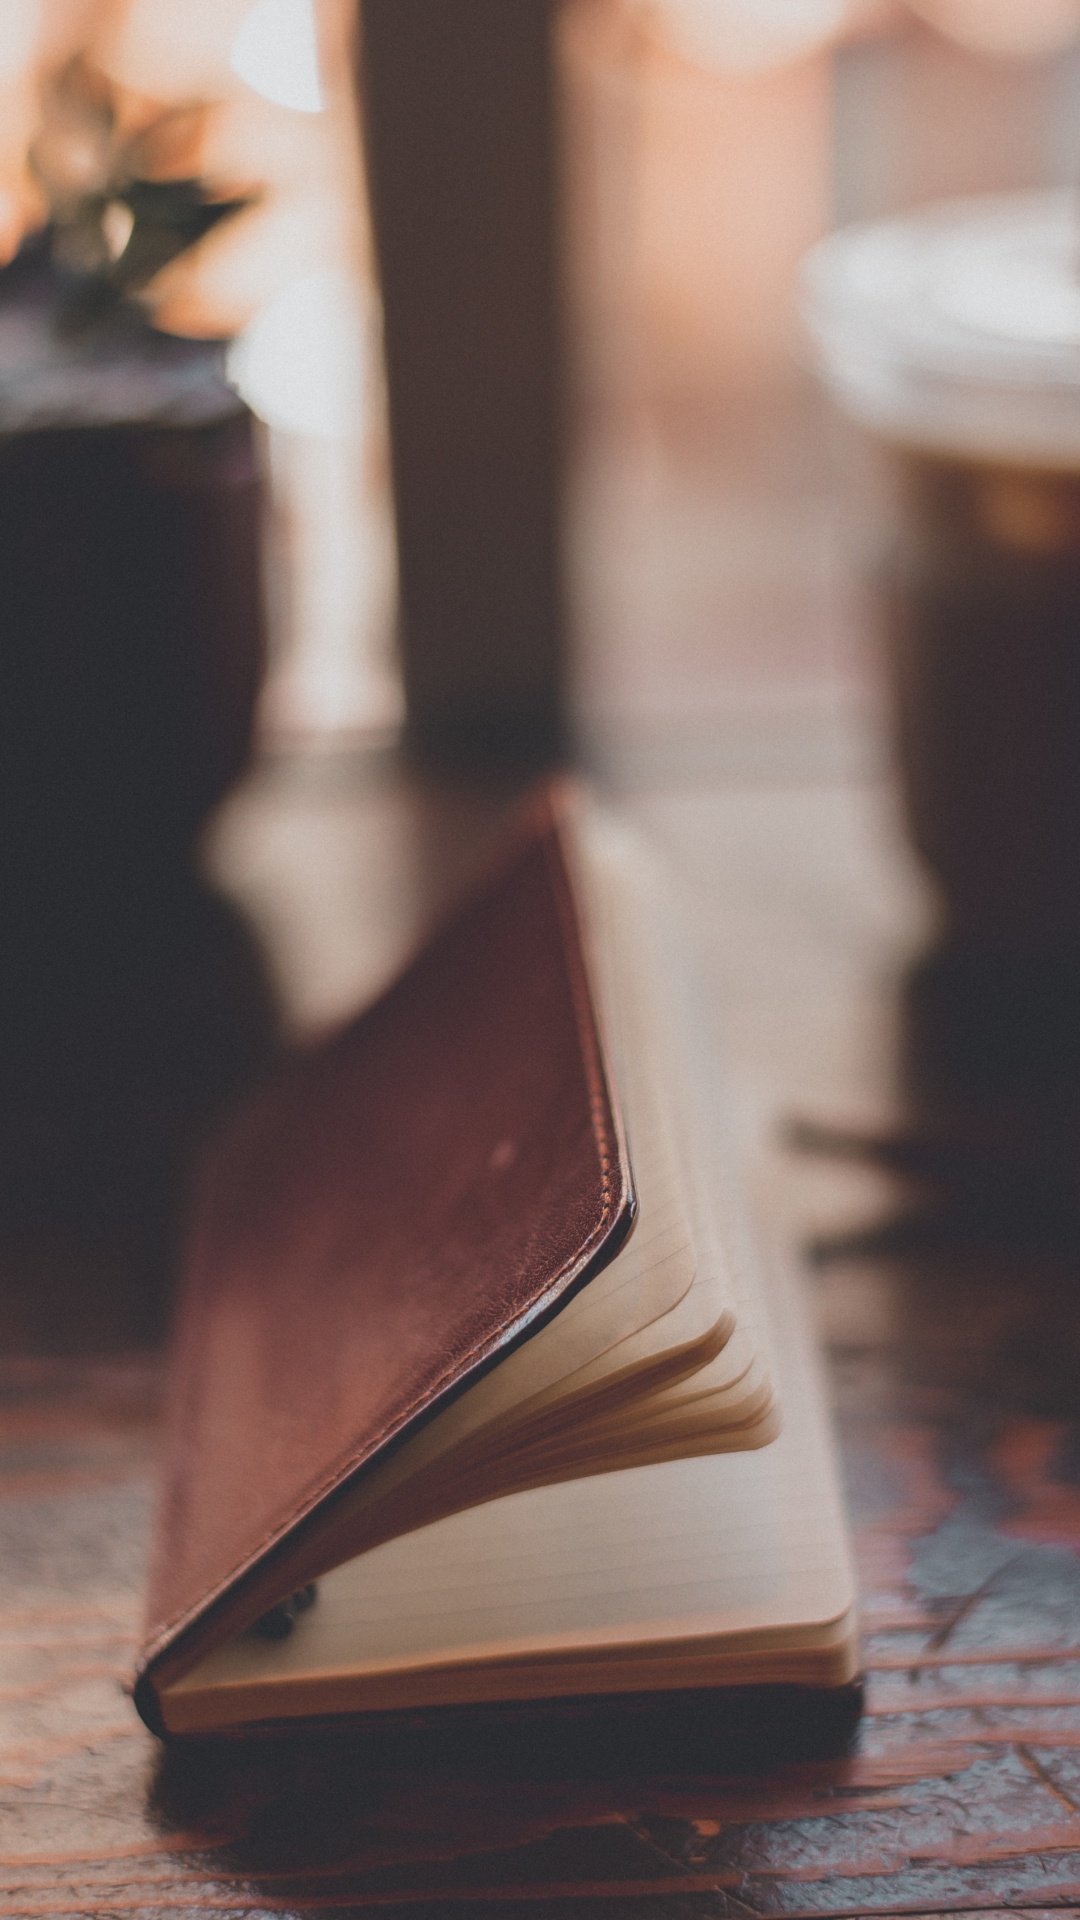 Brown Book on Brown Wooden Table. Wallpaper in 1080x1920 Resolution